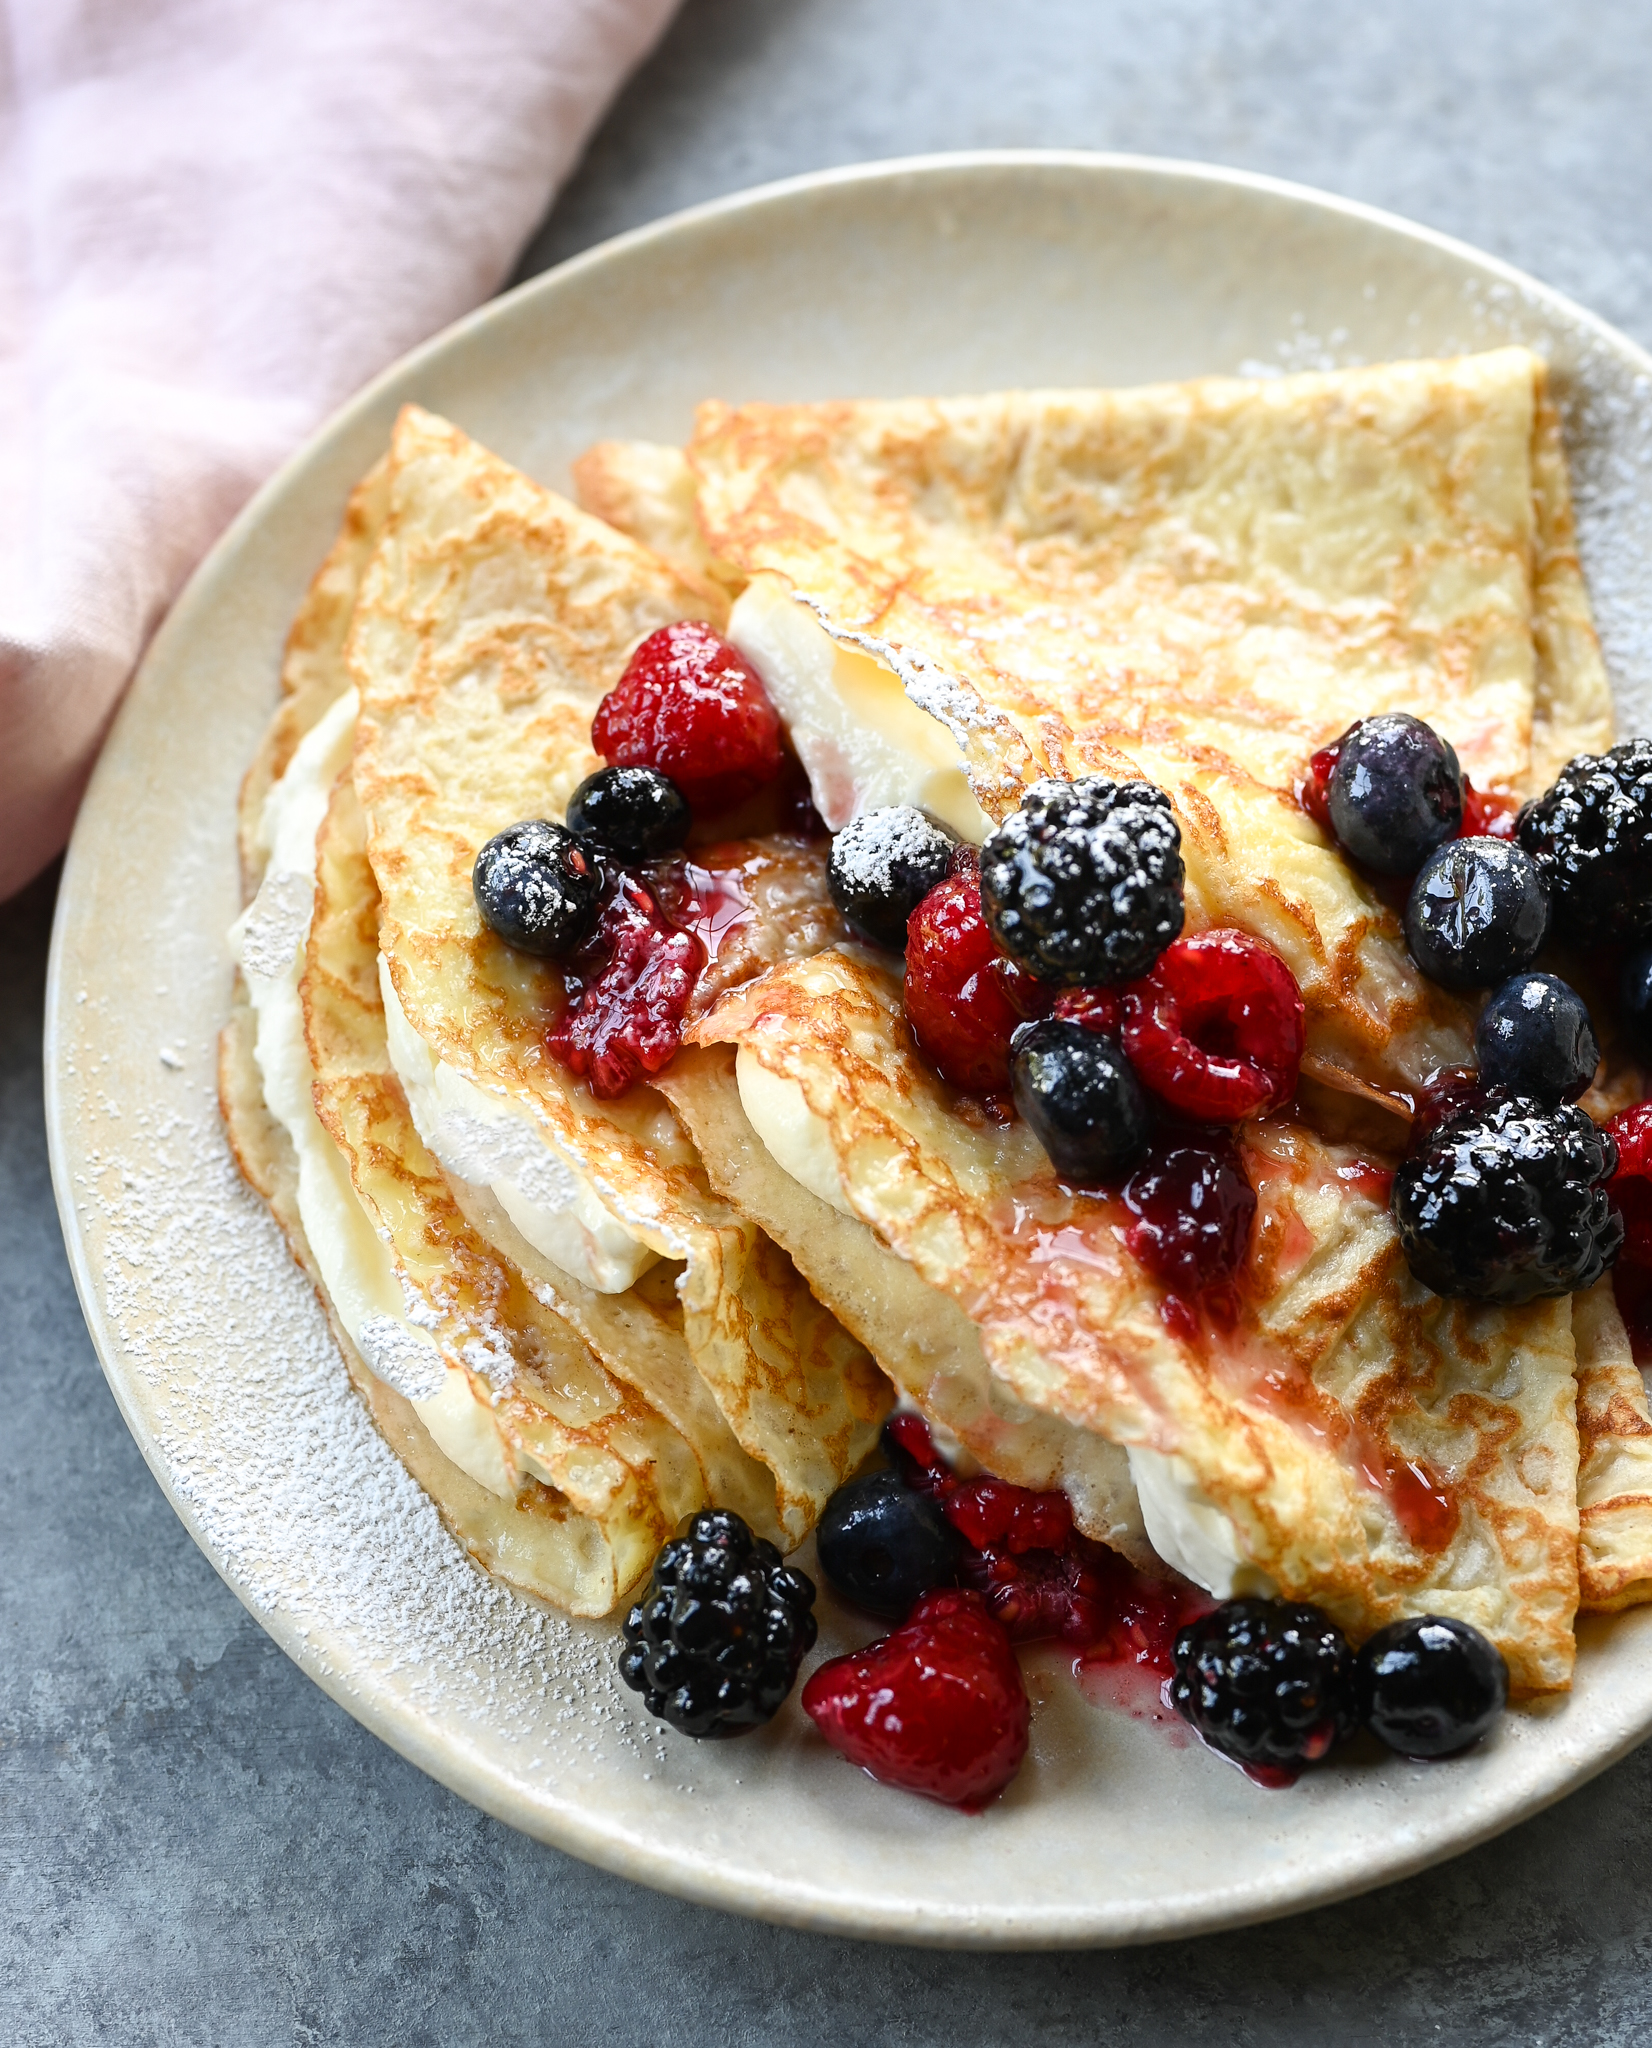 9 Best Crepe Makers to Buy in 2022 - Top-Rated Crepe Pans